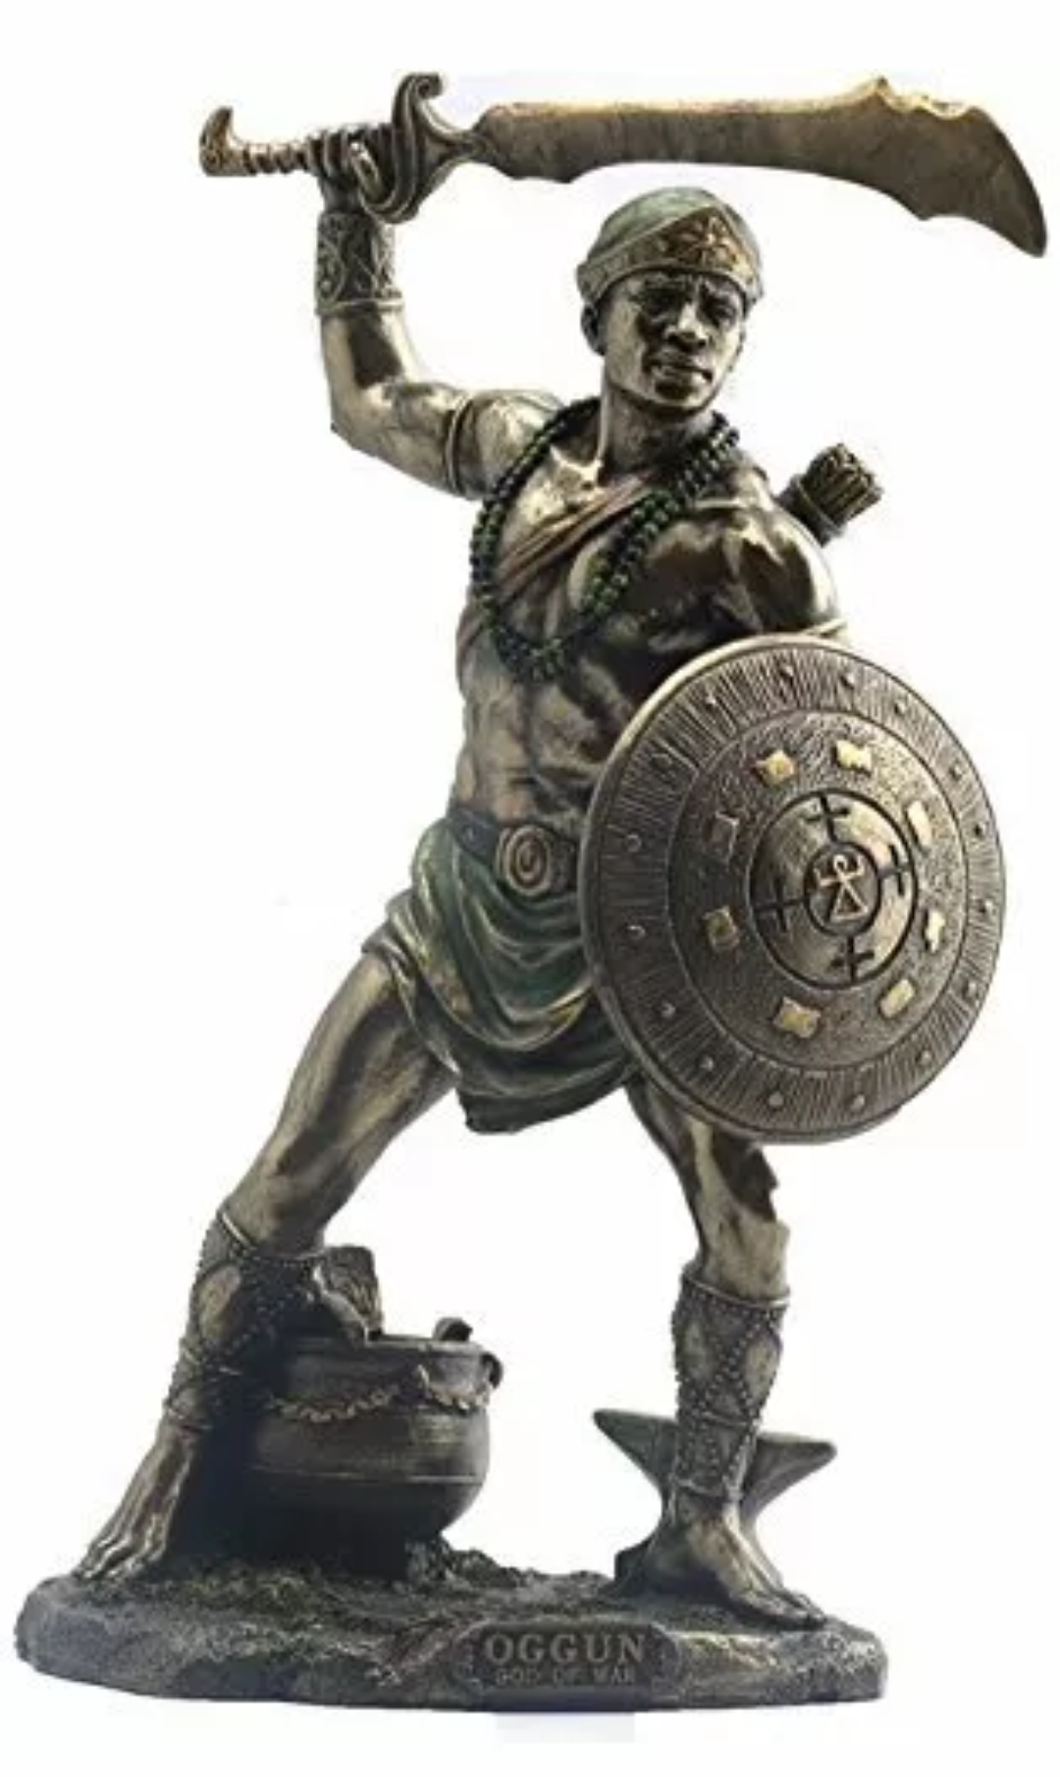 Ogun Statue (Warrior, Truth, Creativity, Accidents) Comes in 2 Sizes